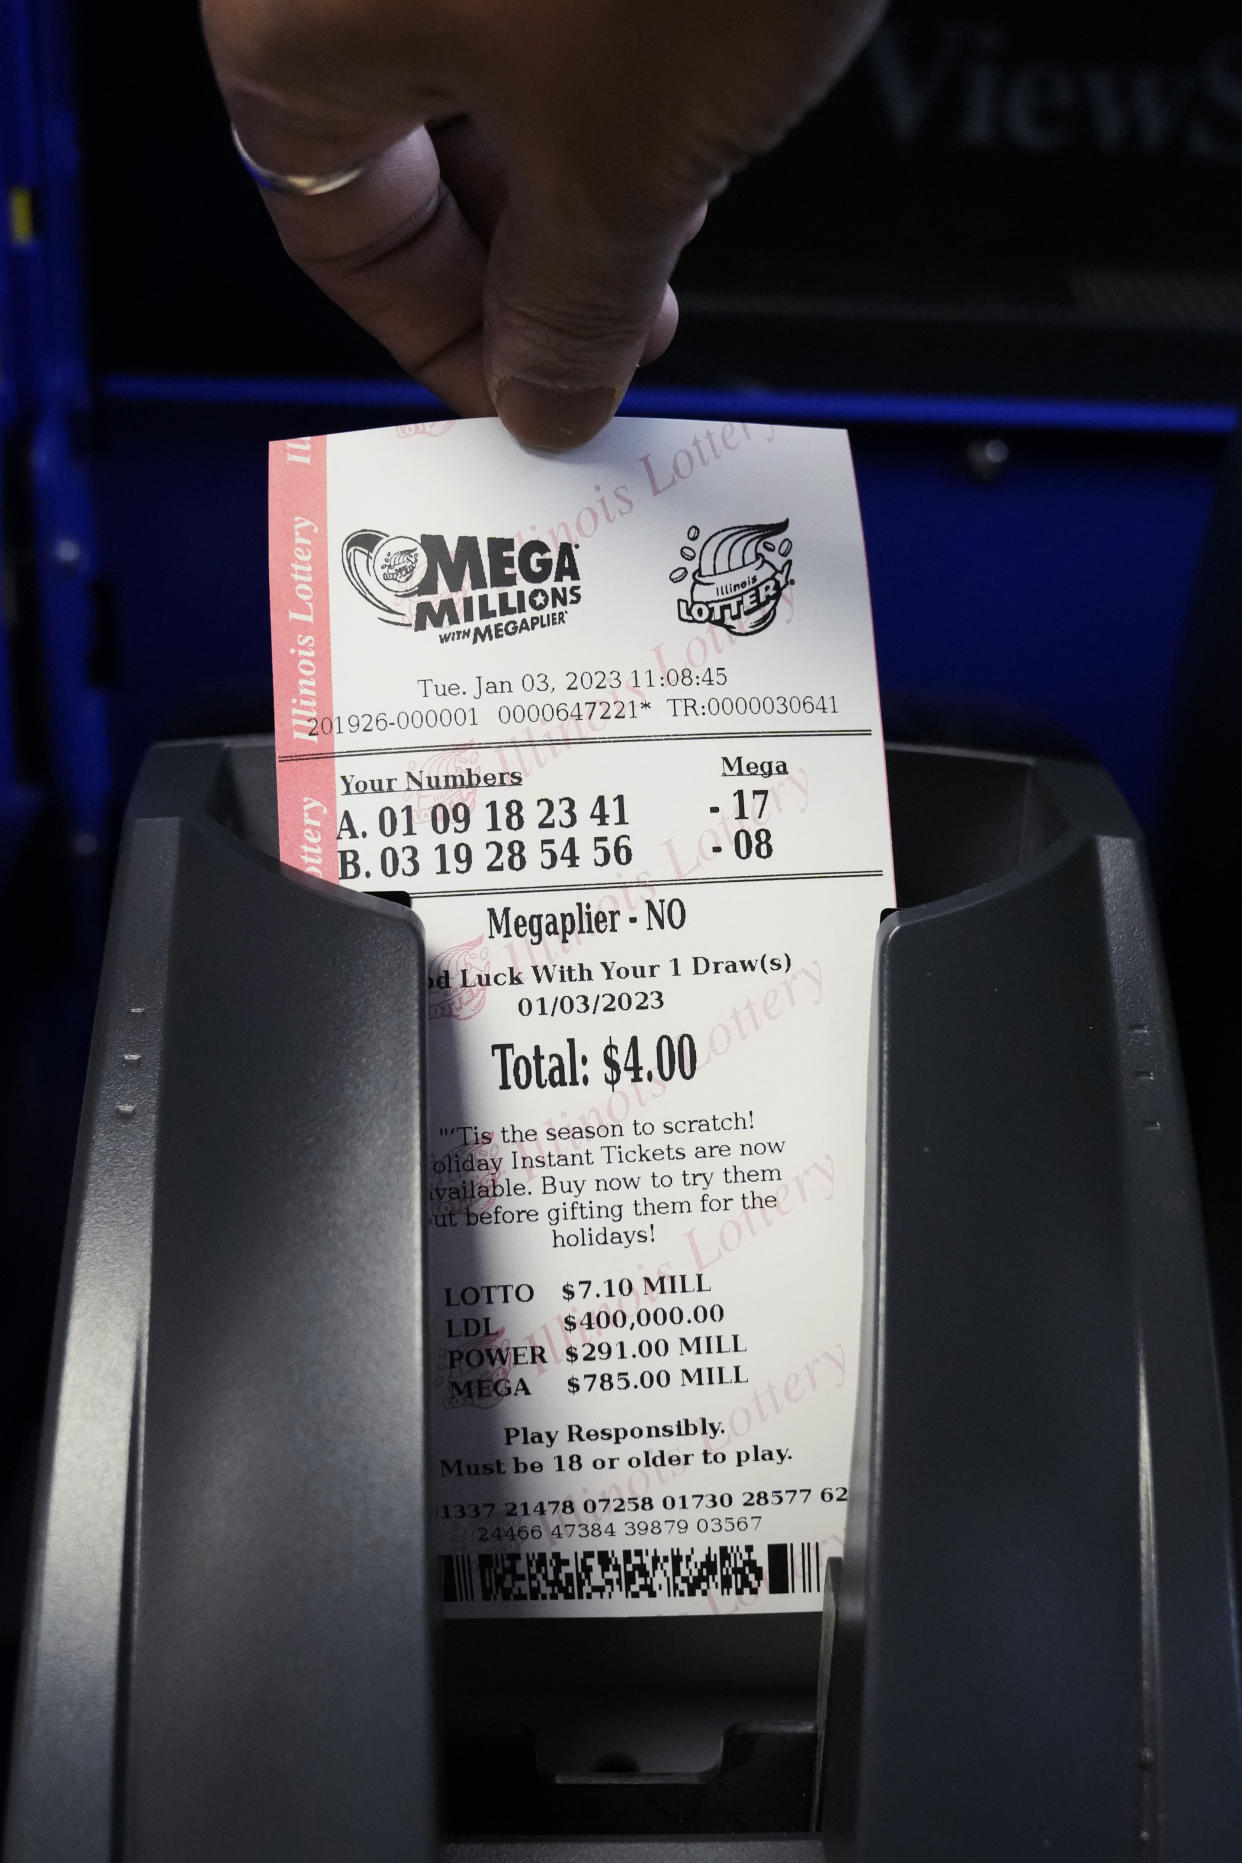 A Mega Millions lottery ticket is printed out of a lottery machine at a convenience store Tuesday, Jan. 3, 2023, in Northbrook, Ill. (AP Photo/Nam Y. Huh)